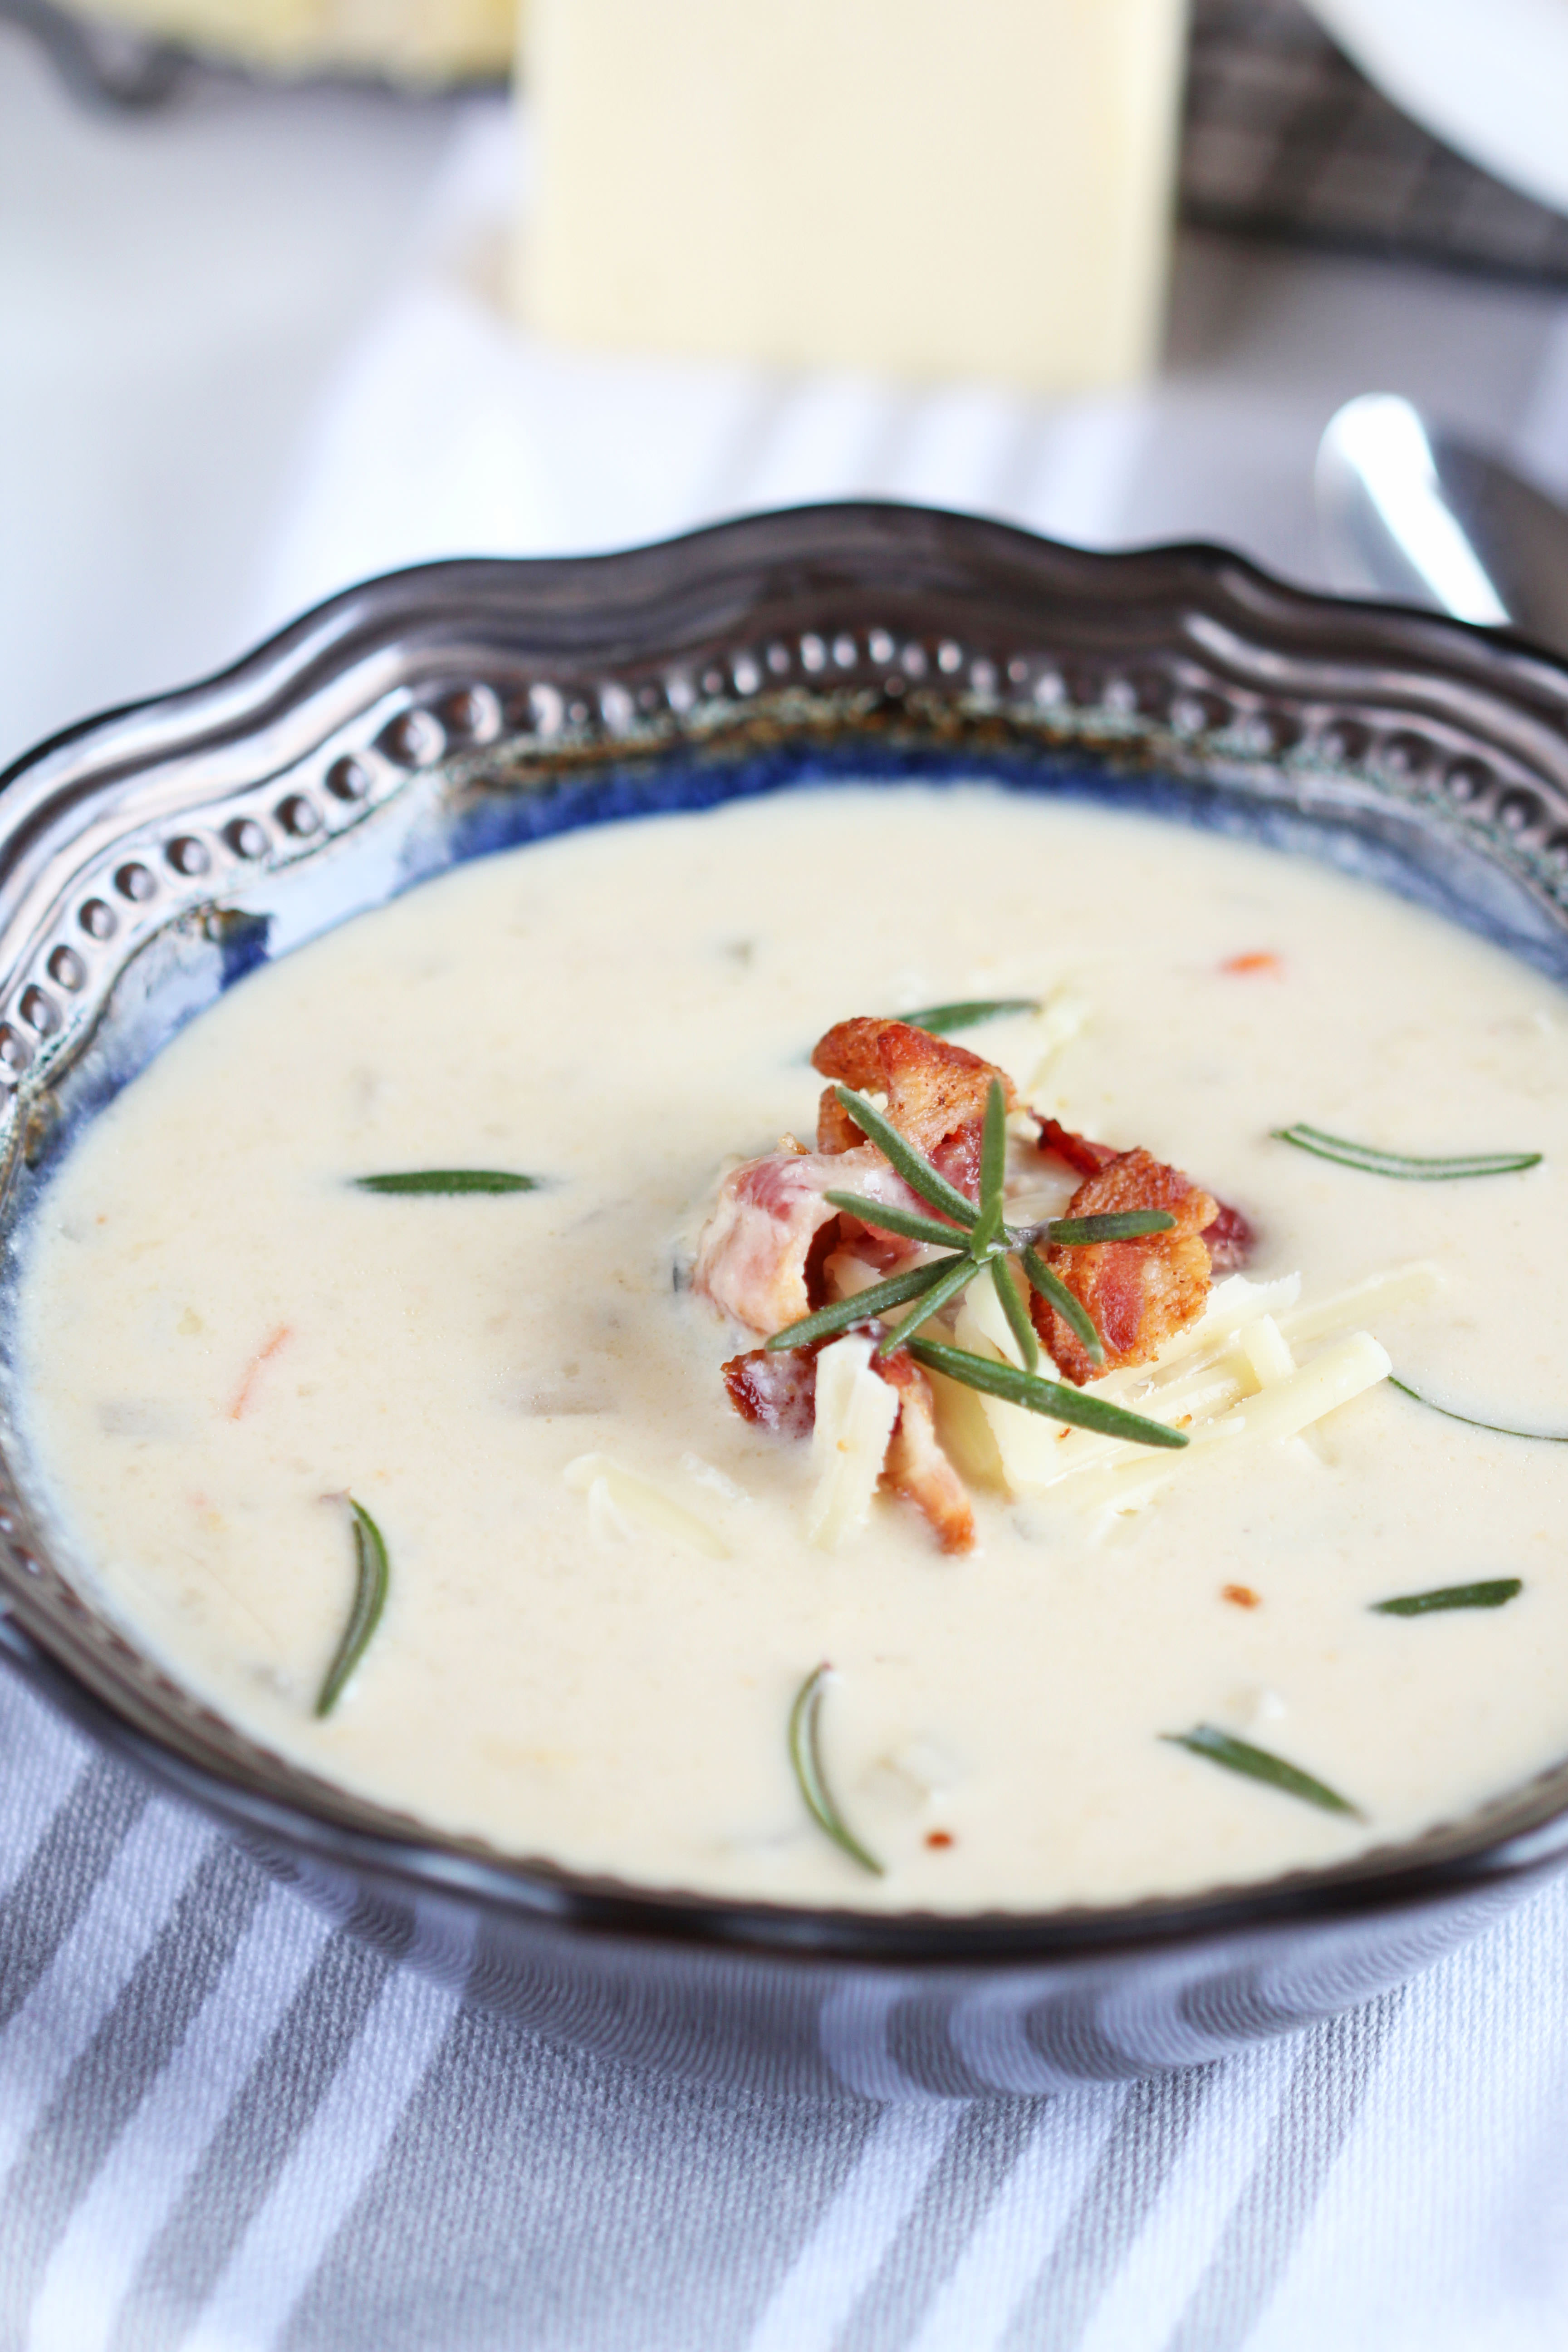 Potato Cheddar Cheese Beer Soup Delicious creamy soup boasting flavor from beer, potatoes and cheddar cheese. Perfection!